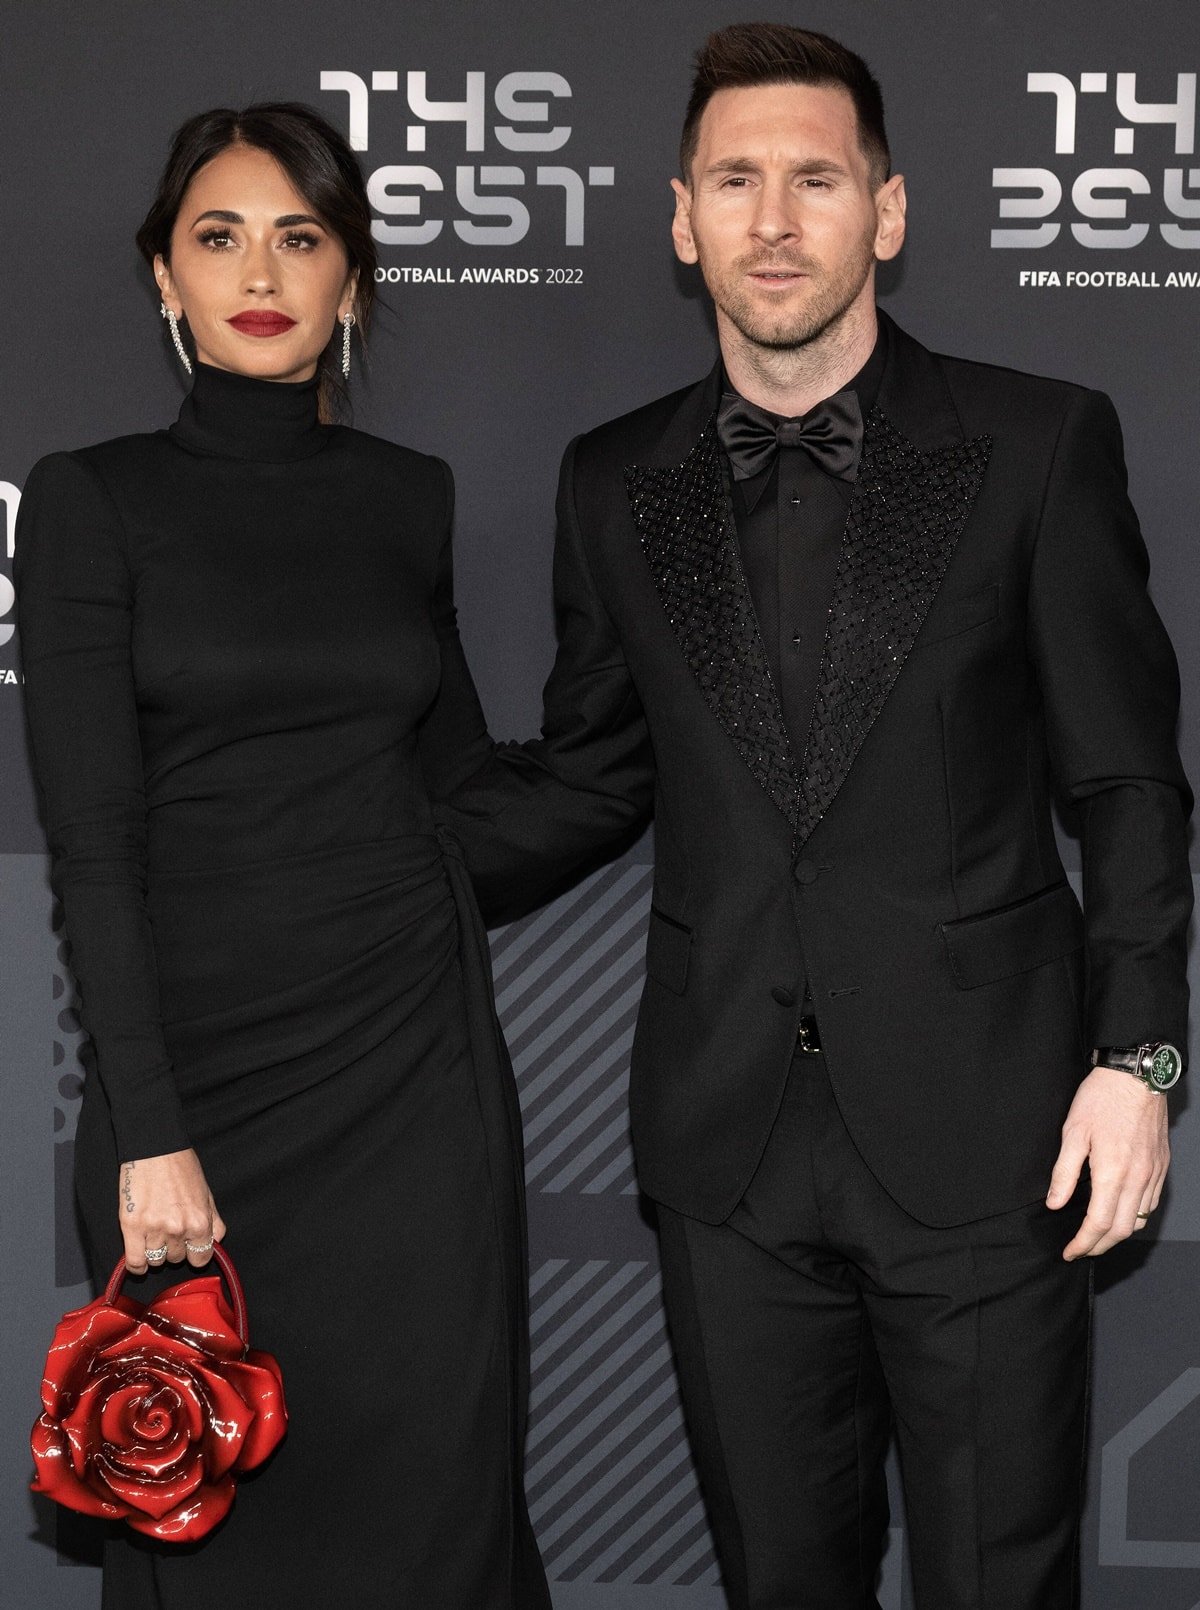 Joined by her husband, Lionel Messi, Antonela Roccuzzo donned an elegant black dress designed by Dolce & Gabbana complemented by a striking red rose-shaped bag at The Best FIFA Football Awards 2022